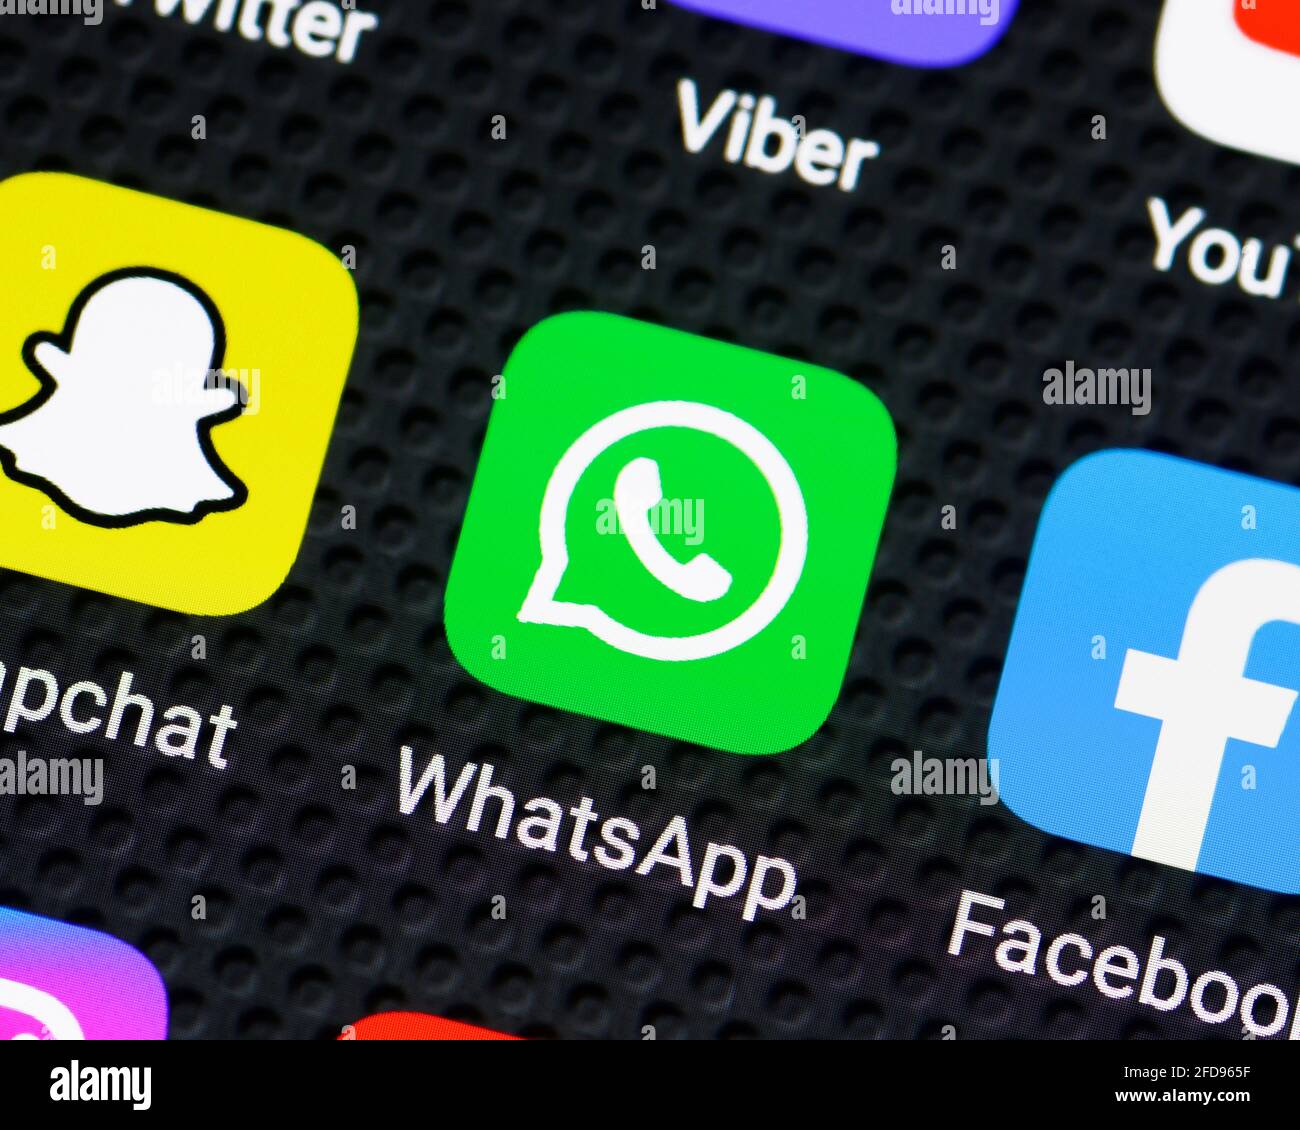 WhatsApp Icon on a Smartphone, Close Up Stock Photo